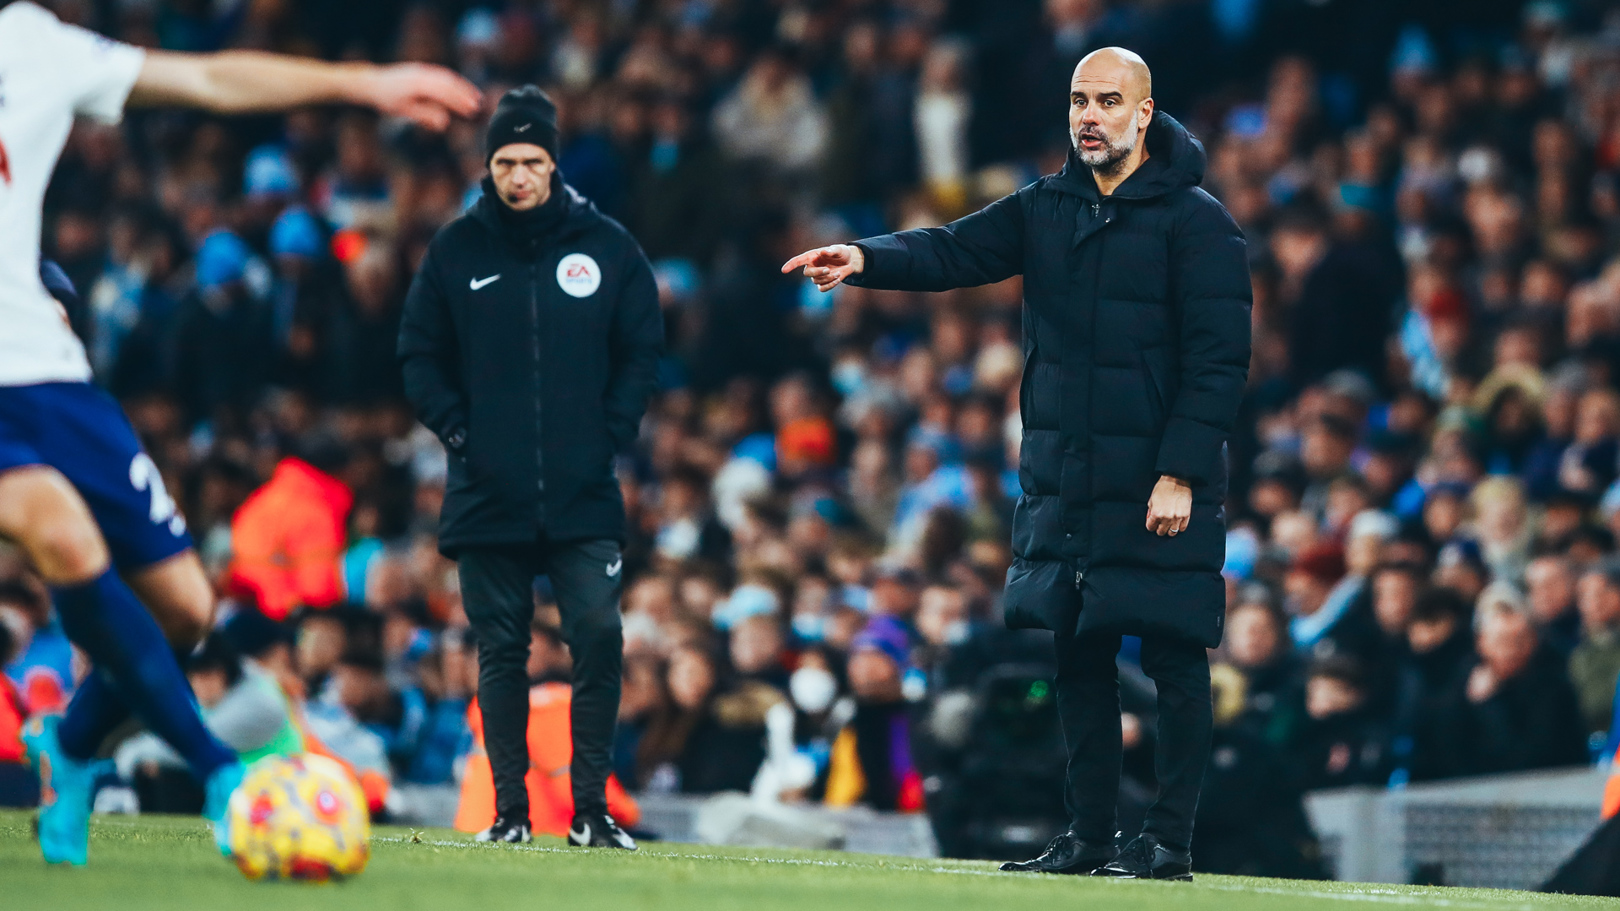 Guardiola: 'We need to win many games'